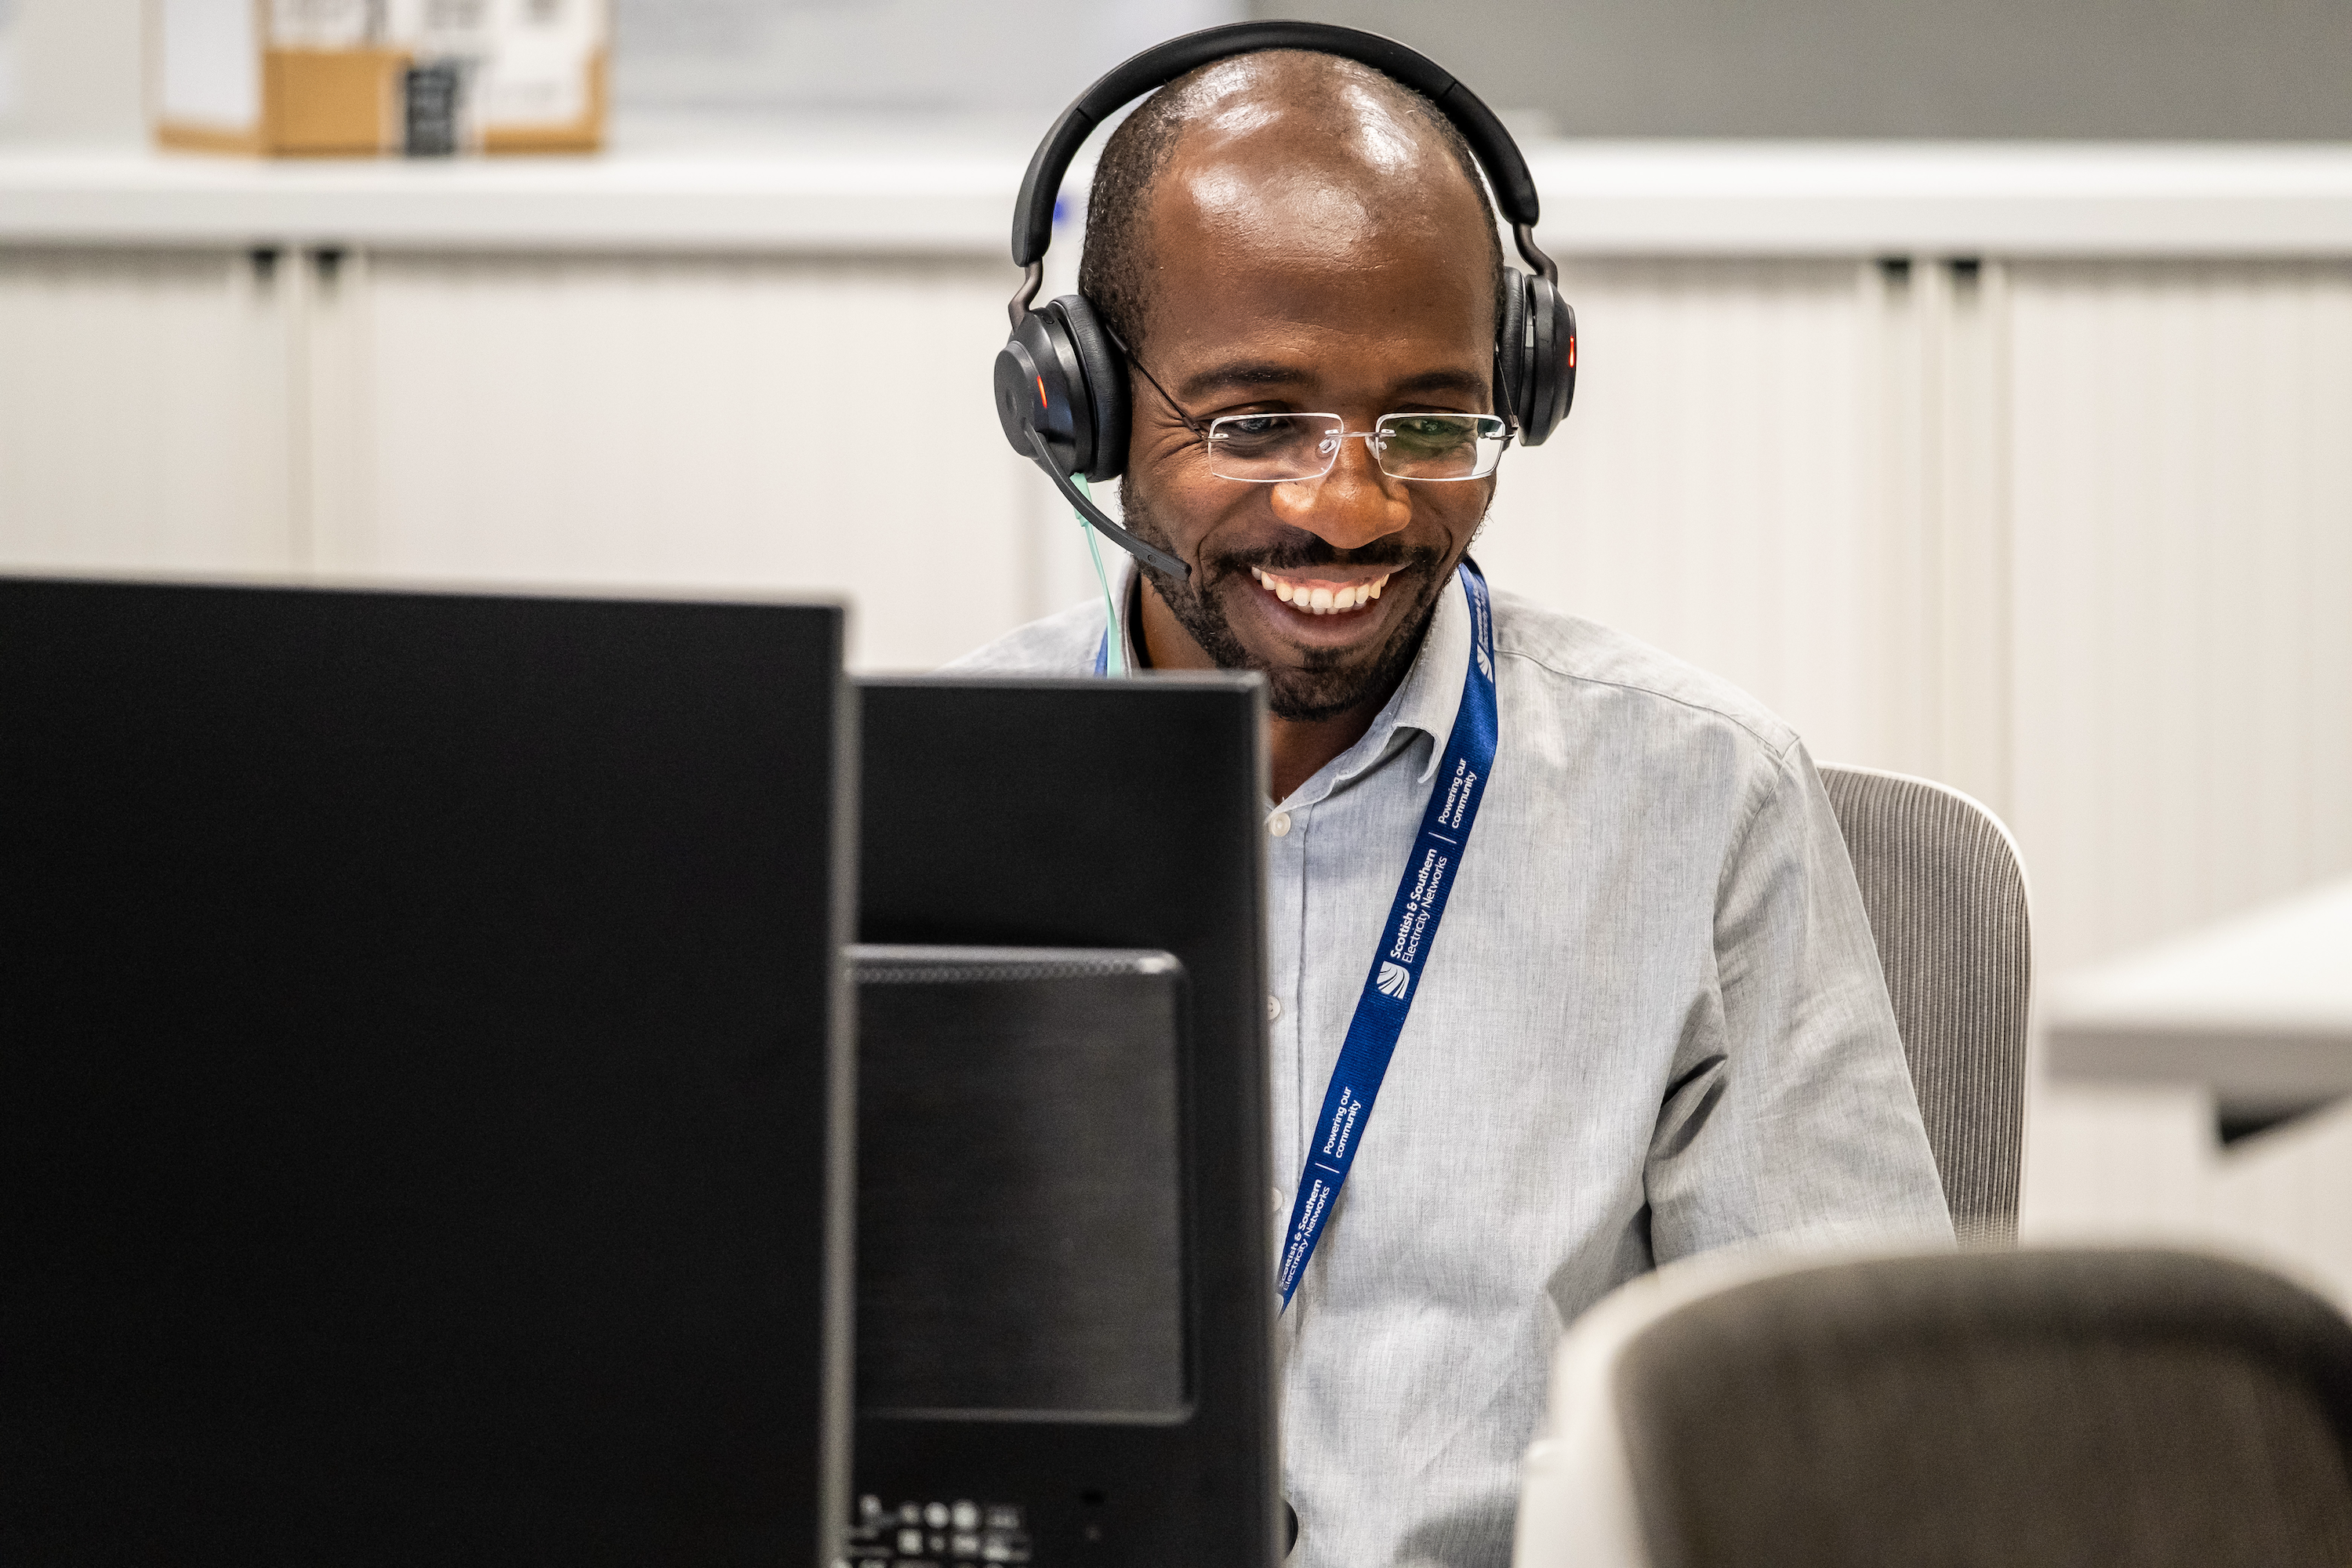 The image features a man working in a modern office setting. He is wearing a light grey shirt, glasses, and a headset with a microphone, suggesting he is engaged in a virtual call. The man is smiling broadly, looking at a computer screen, indicating he is having a pleasant interaction.